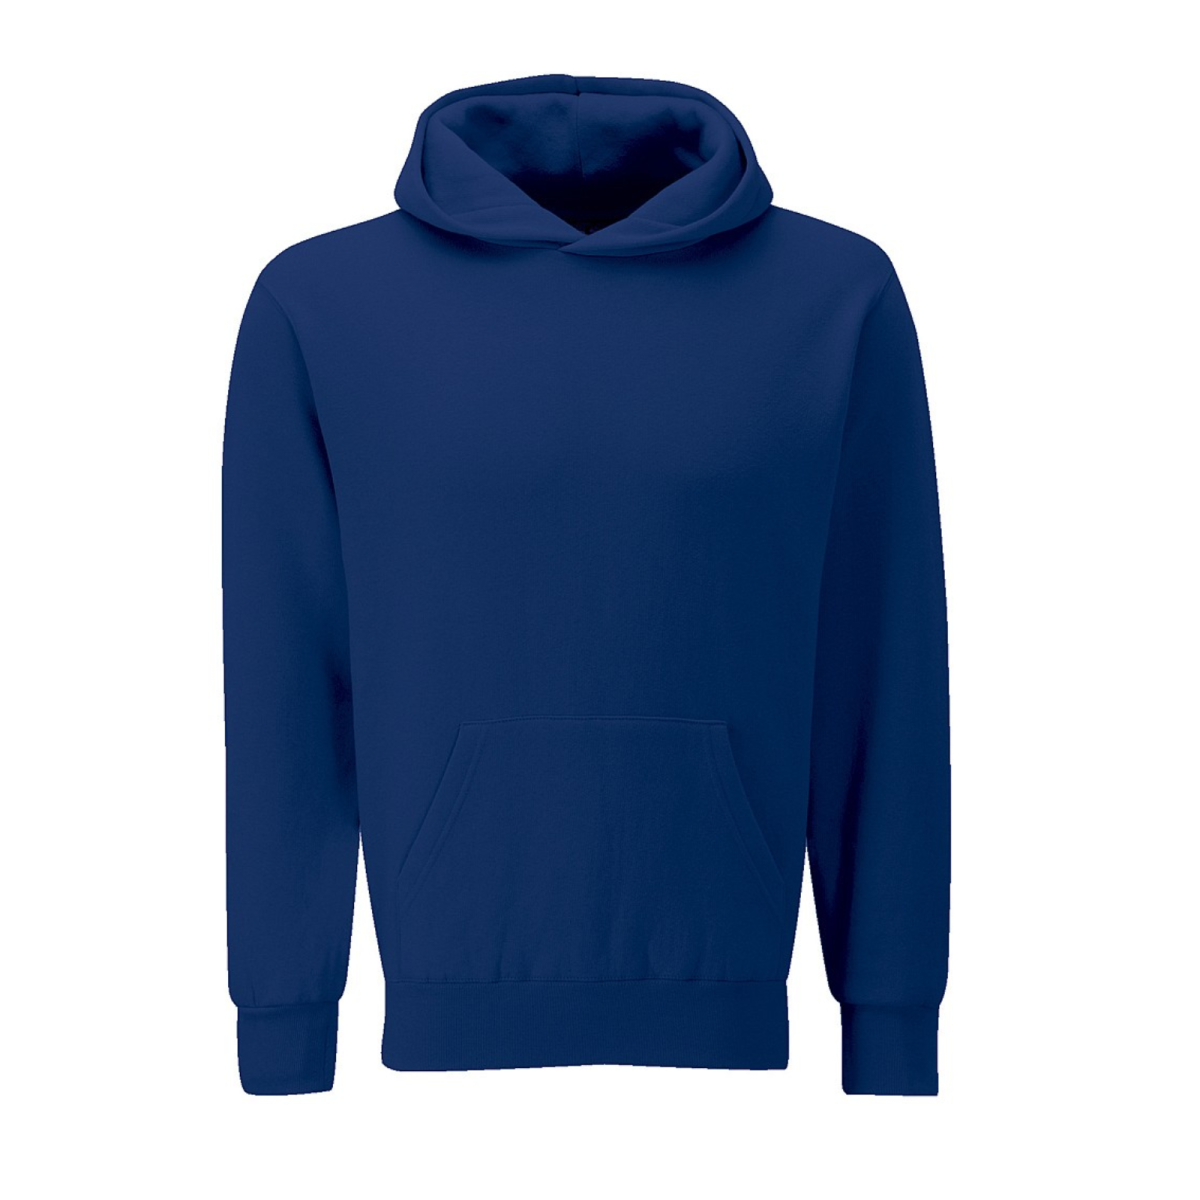 [EKM-AUTOGENERATED]Rodmersham Navy Hooded PE Top with Logo - Forsters ...